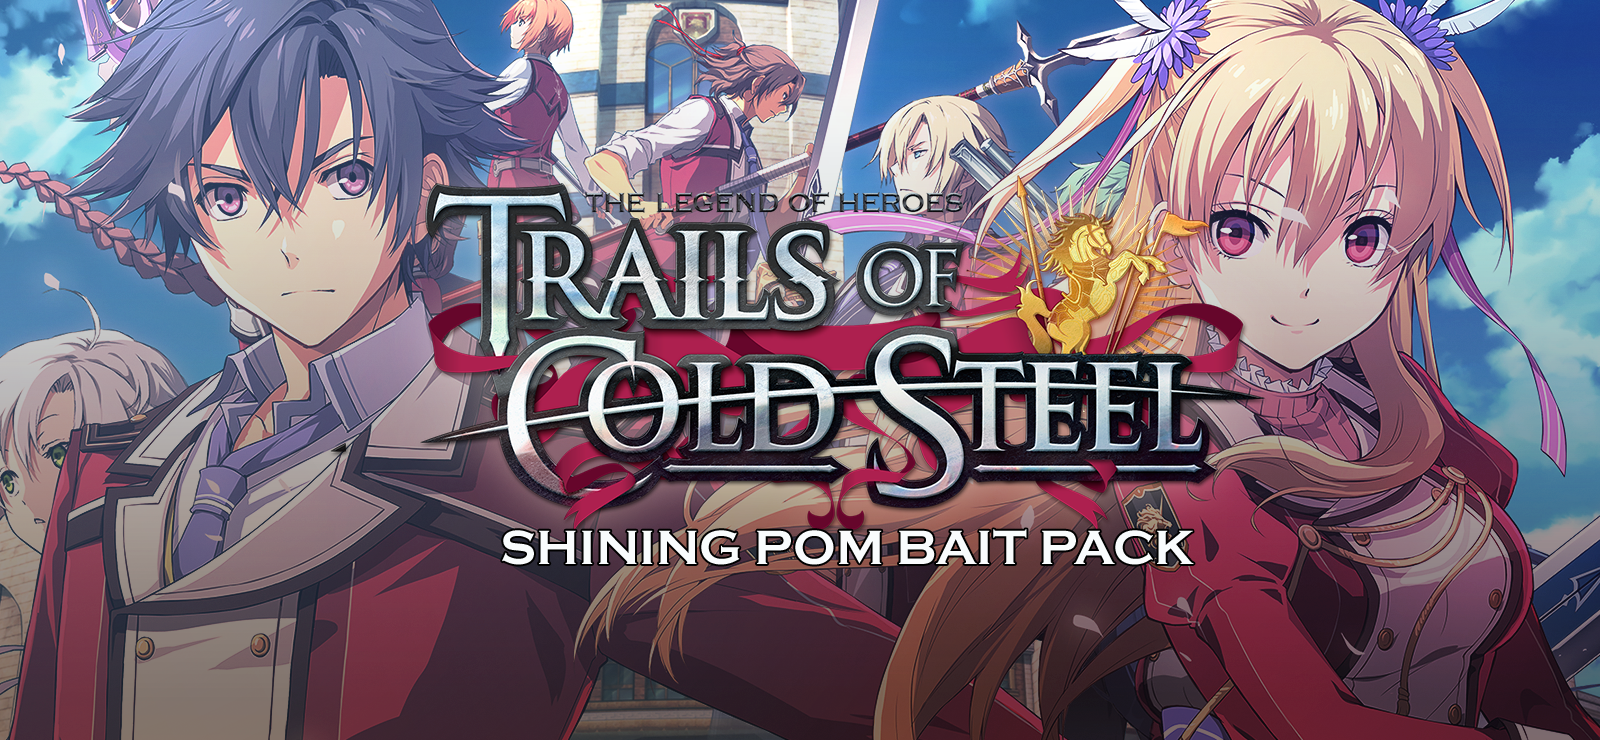 The Legend Of Heroes: Trails Of Cold Steel - Shining Pom Bait Pack